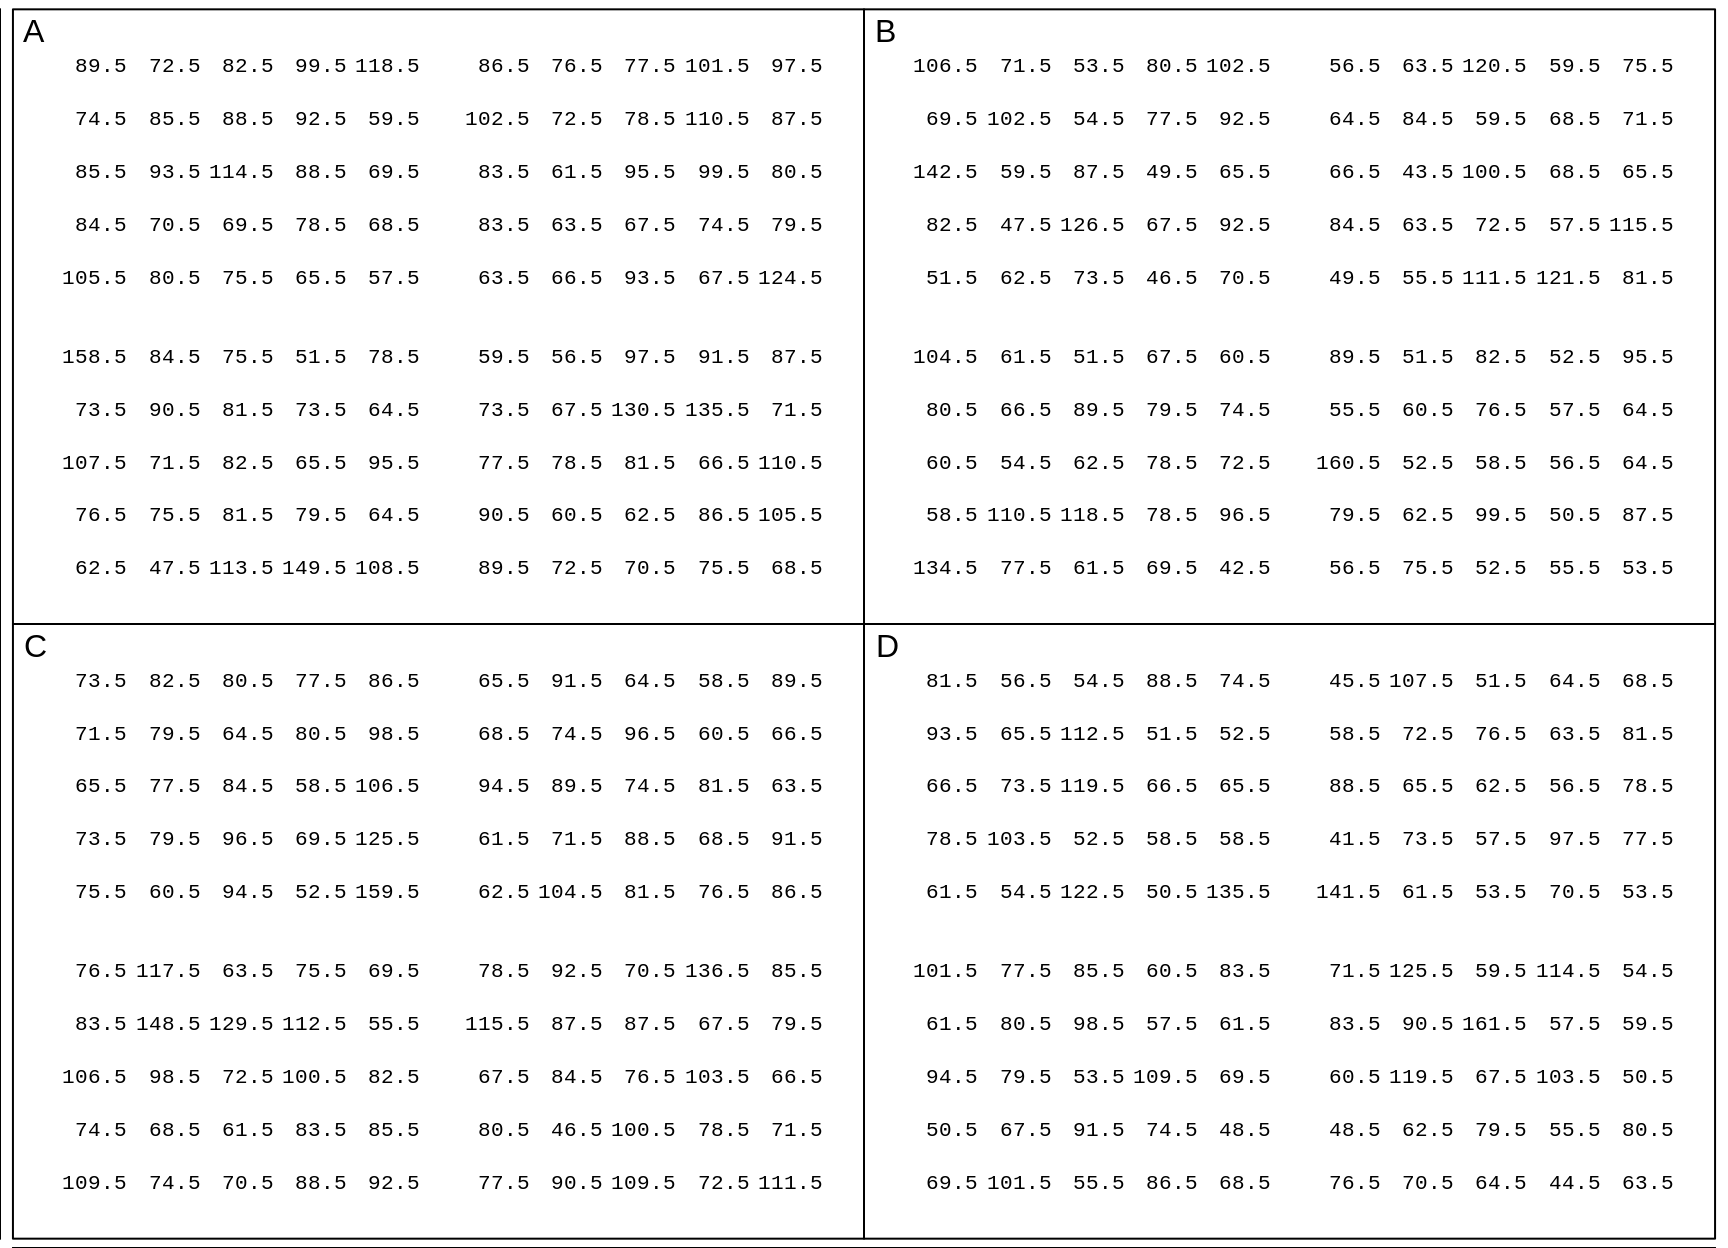 Measured weights of US males and females aged 20-29 in 2007-2008. In each panel, each entry is one of the 100 (sex-specific) quantiles Q0.5%, Q1.5%,  Q2.5%, Q49.5%, Q50.5%, etc, up to Q99.5%, so you can think of it as representing 1 percent of the population of that sex. In each panel, the Q's are scrambled, and 'jittered'.